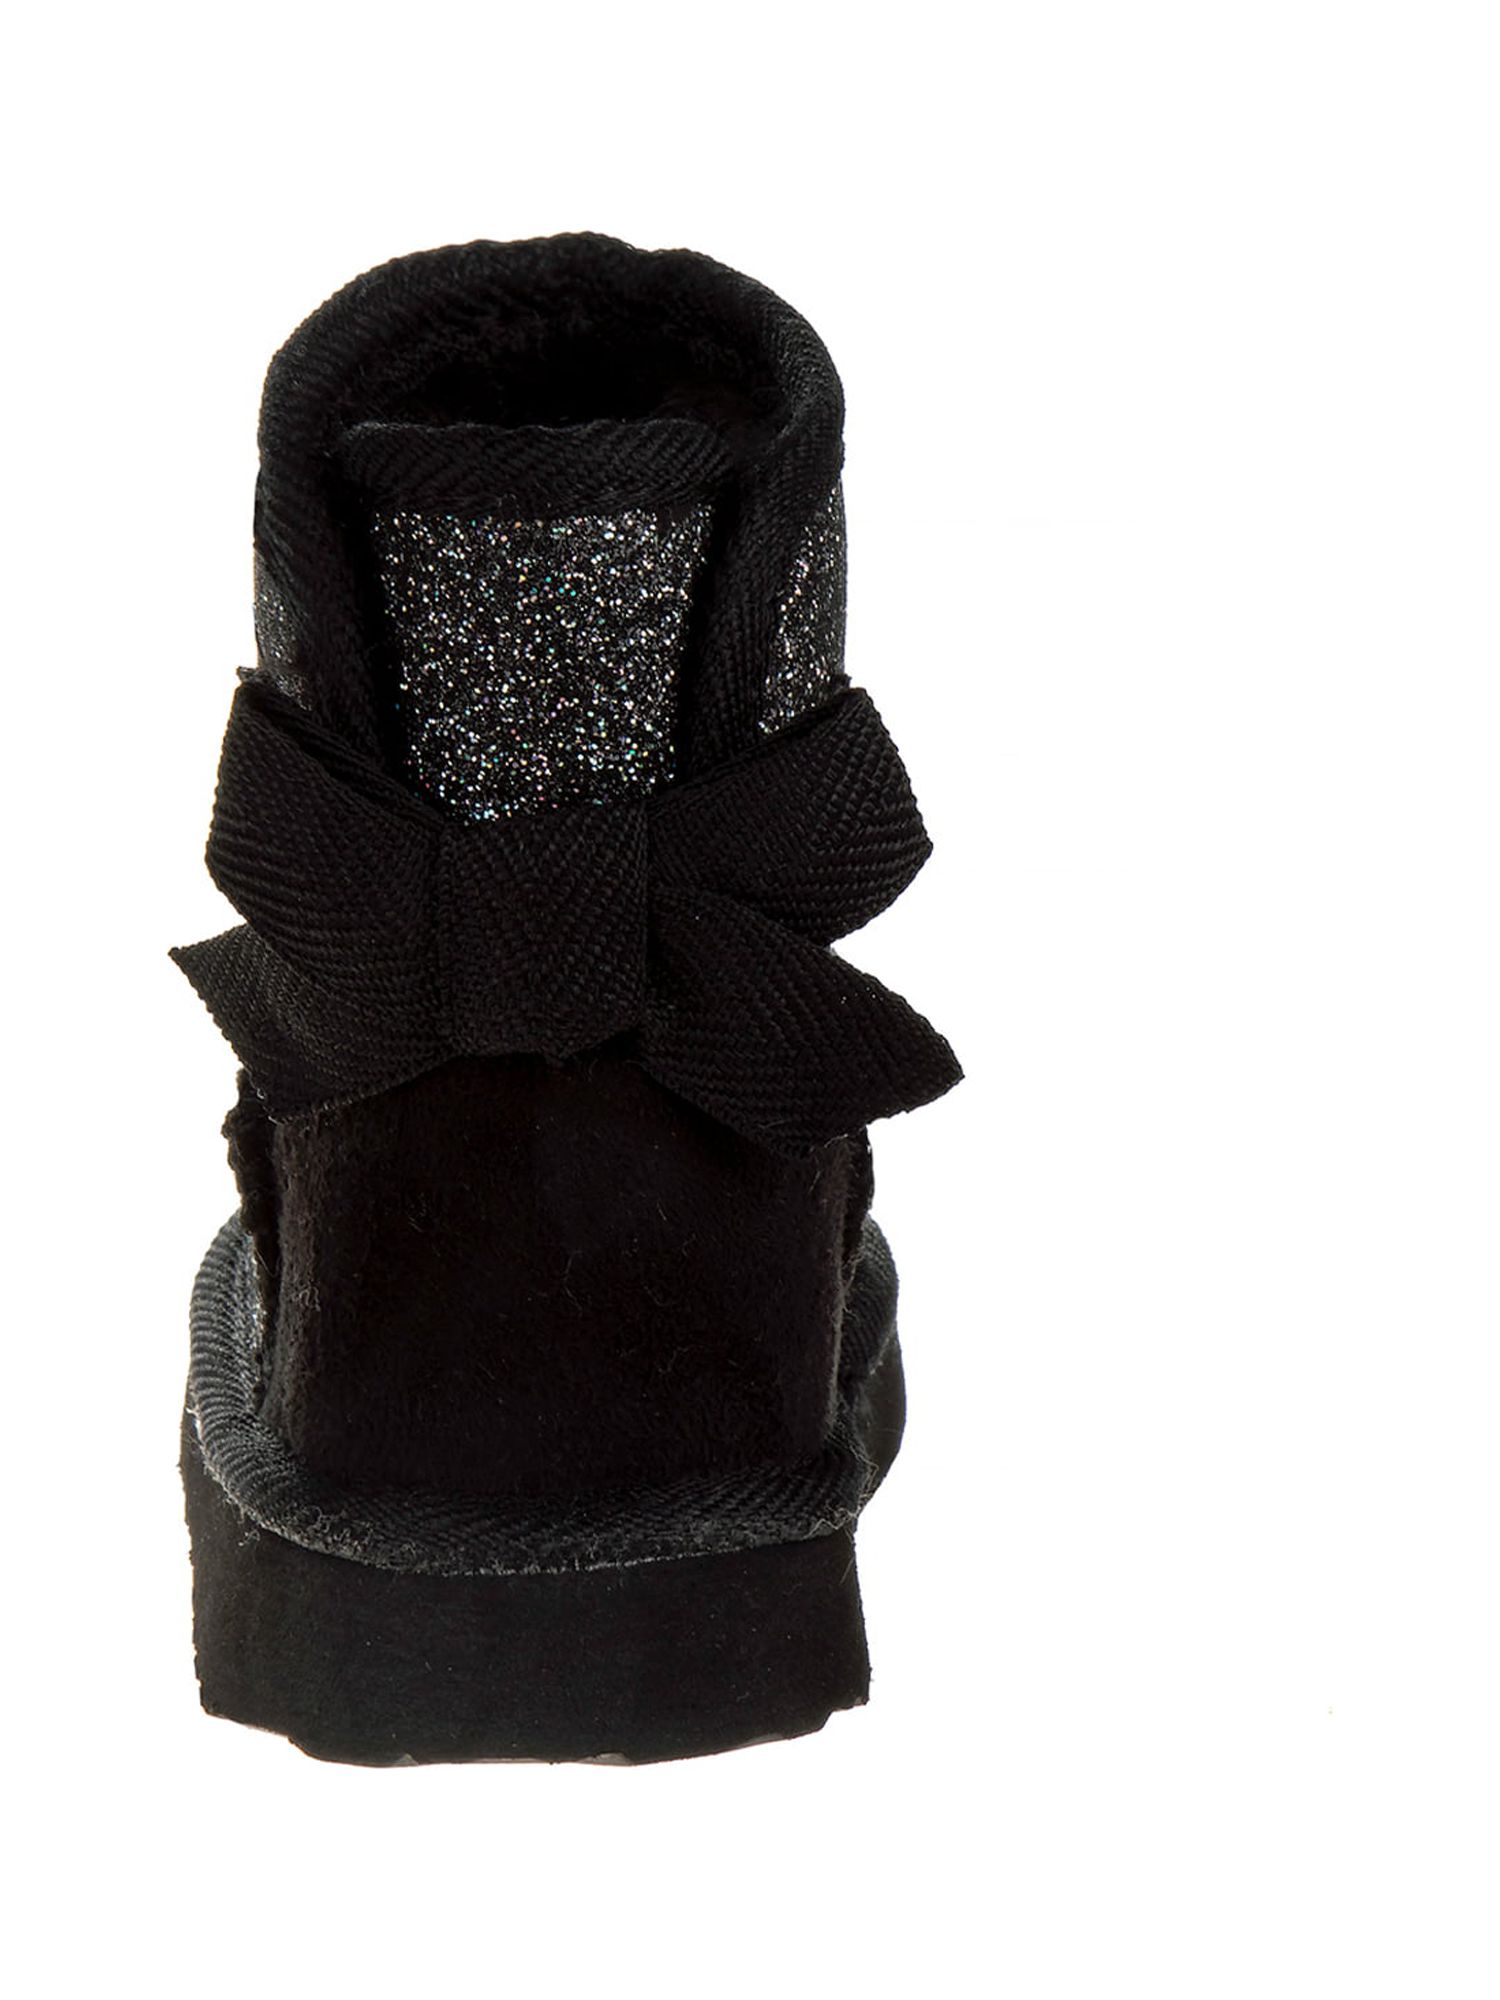 Josmo Glitter & Bows Faux Shearling Ankle Boot (Toddler Girls) - image 4 of 5